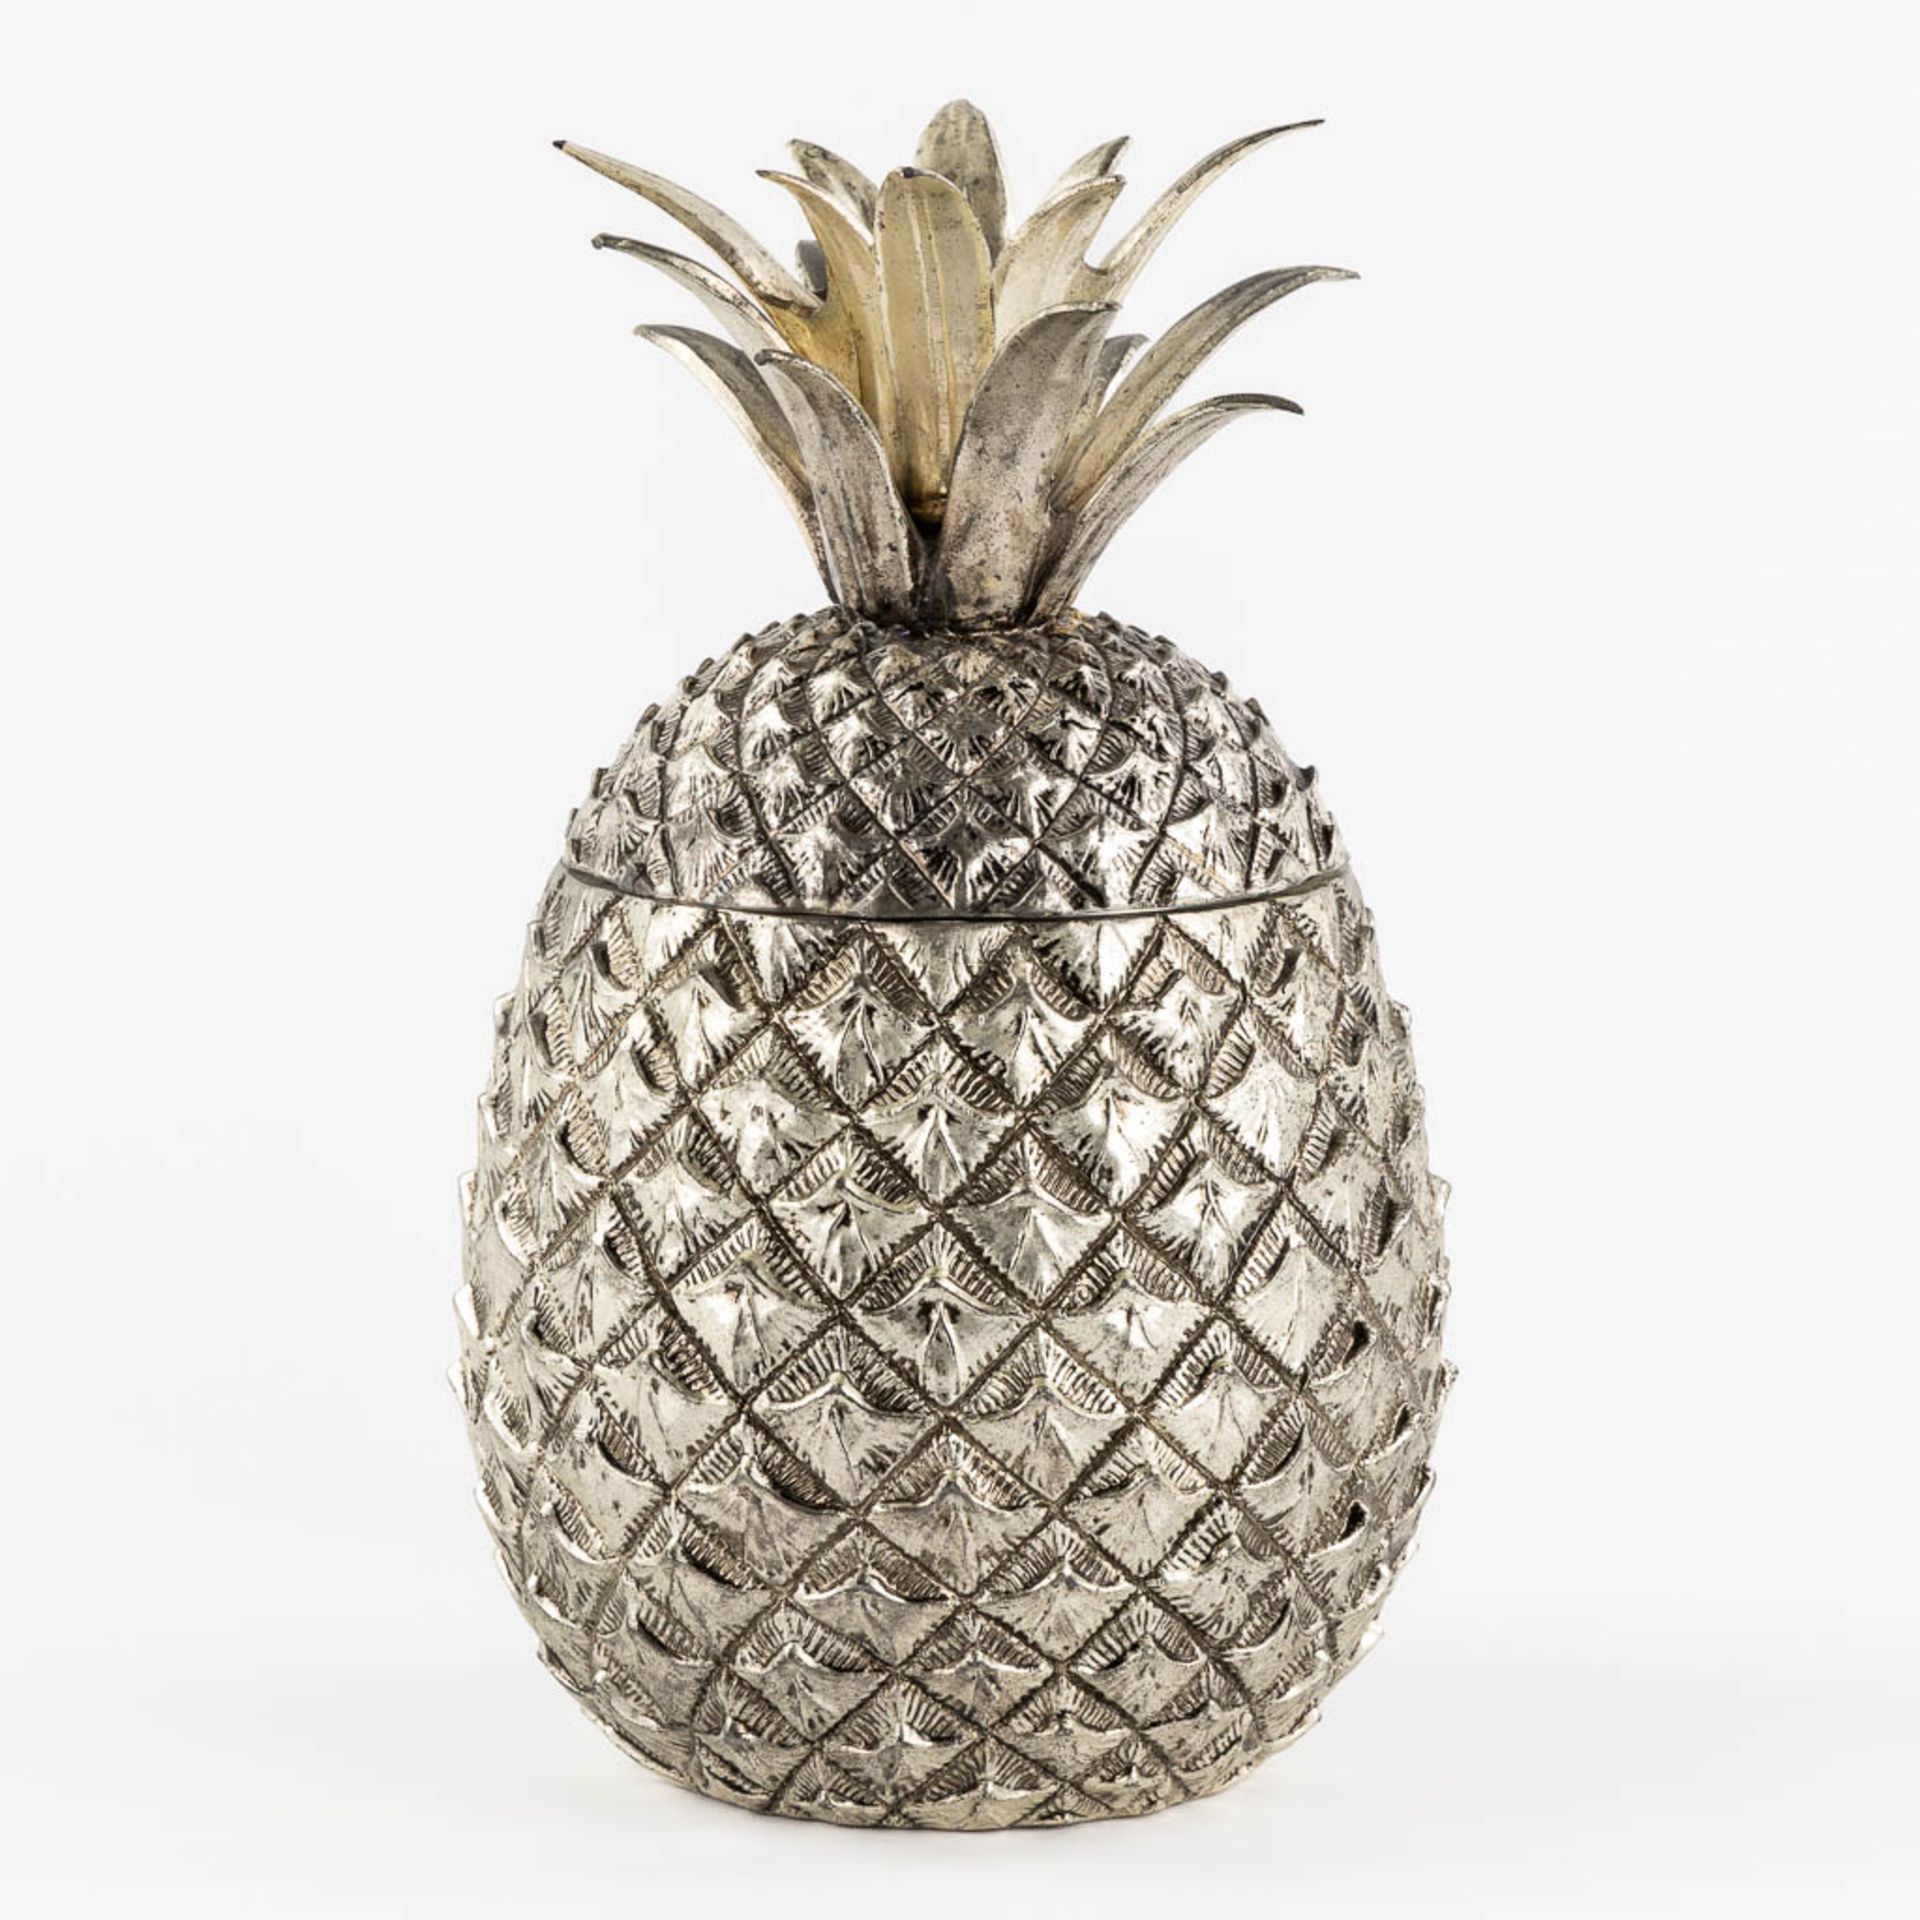 Mauro MANETTI (1946) 'Exceptionally large Pineapple ice pail'. (H:38 x D:22 cm)